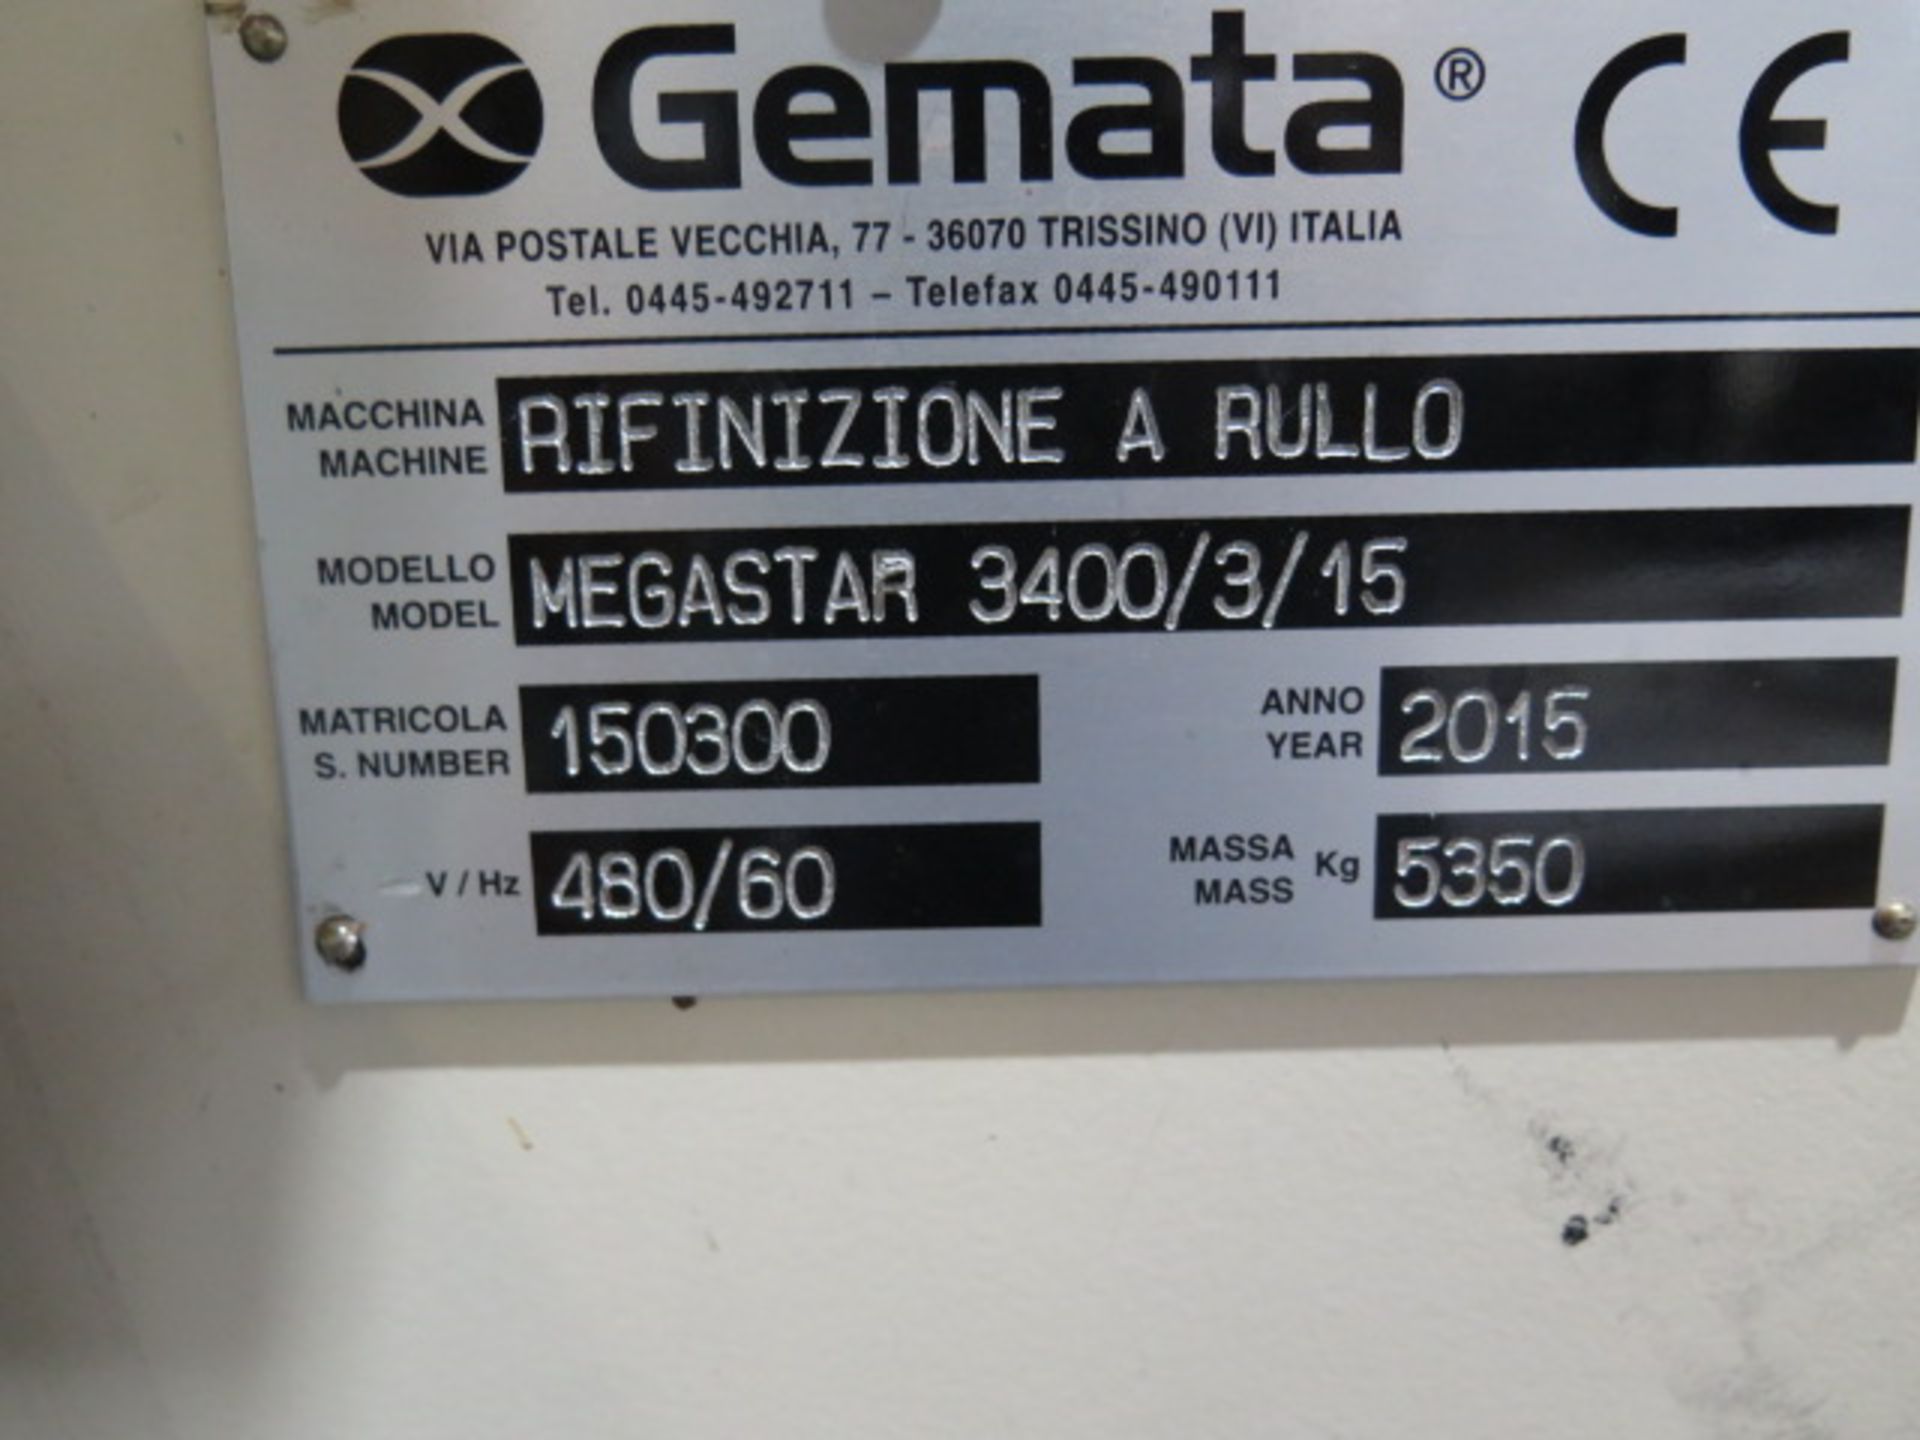 2015 Gemata Rifinizlone A Rullo “Megastar” 3400/3/15 Roller Pigment Coating Machine SOLD AS IS - Image 17 of 17